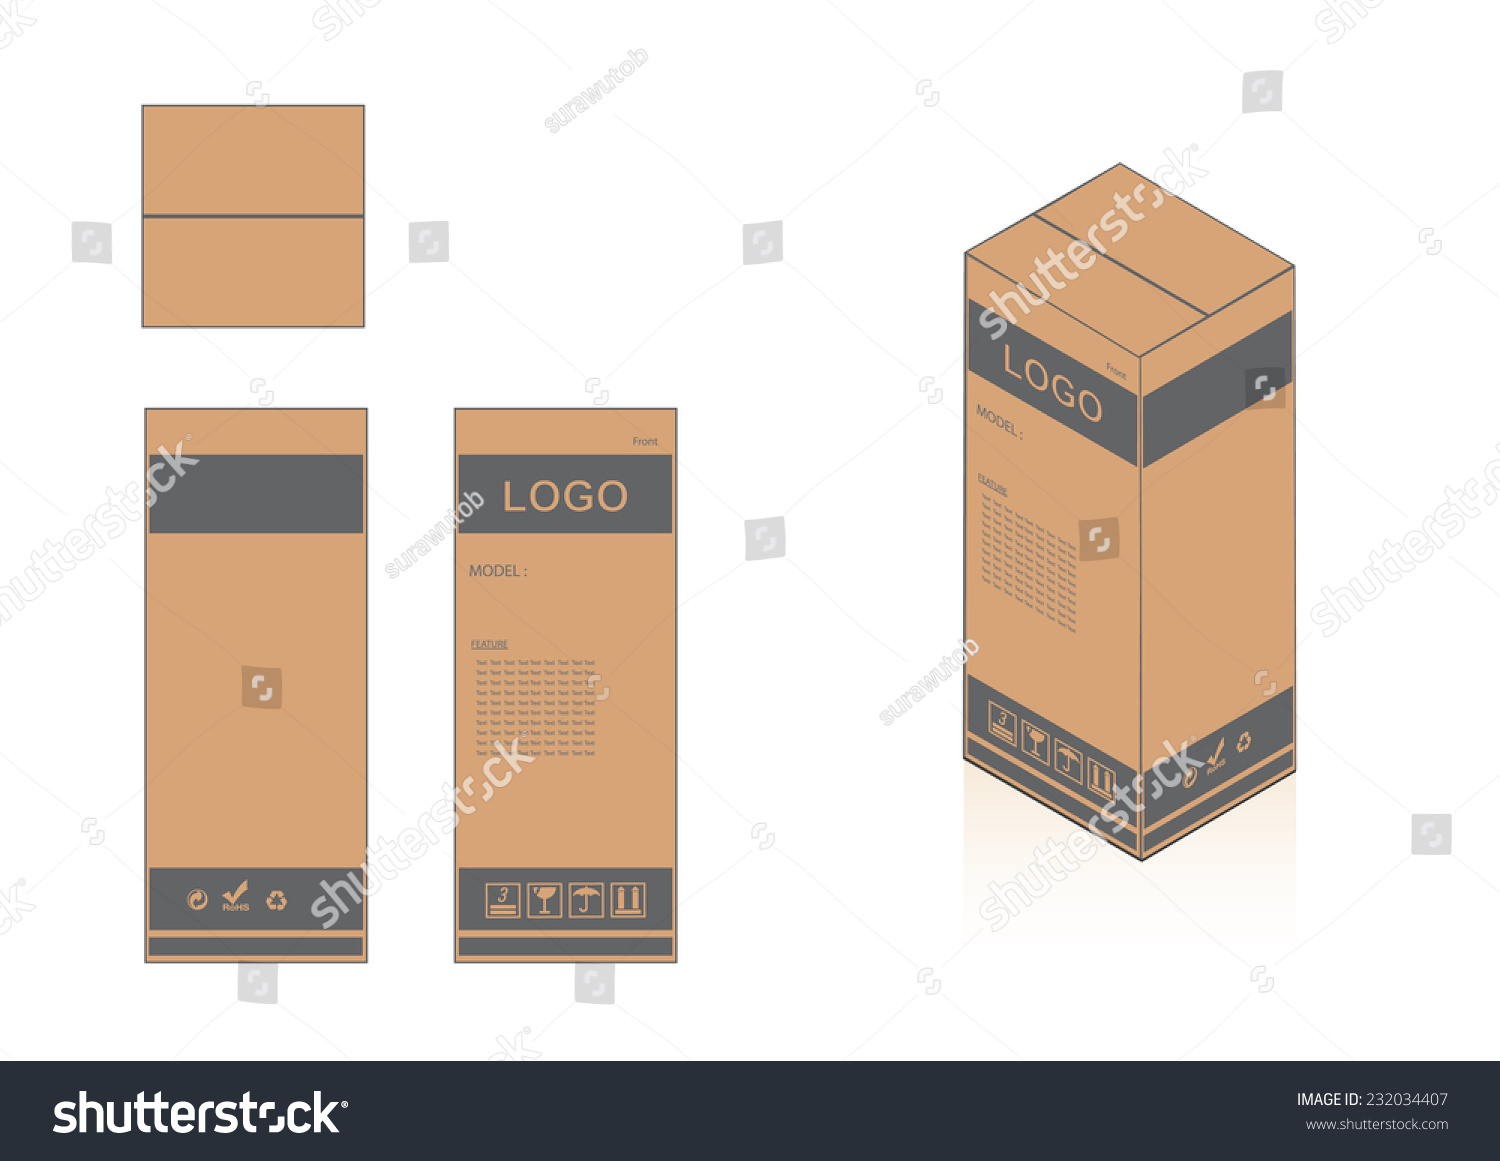 Download Cardboard Carton Box Container Top View Stock Vector Royalty Free 232034407